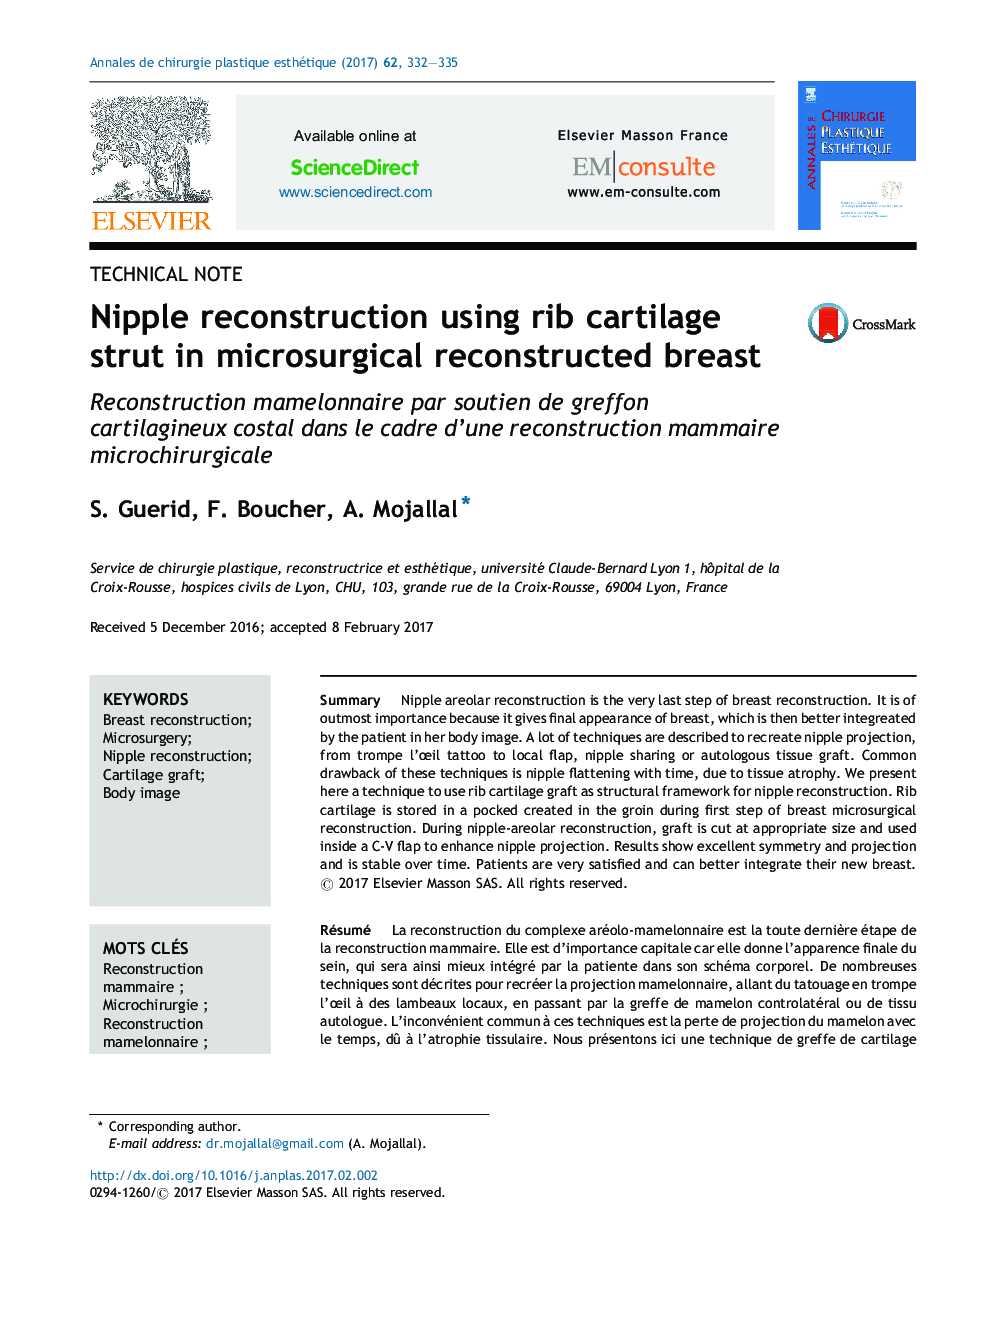 Nipple reconstruction using rib cartilage strut in microsurgical reconstructed breast